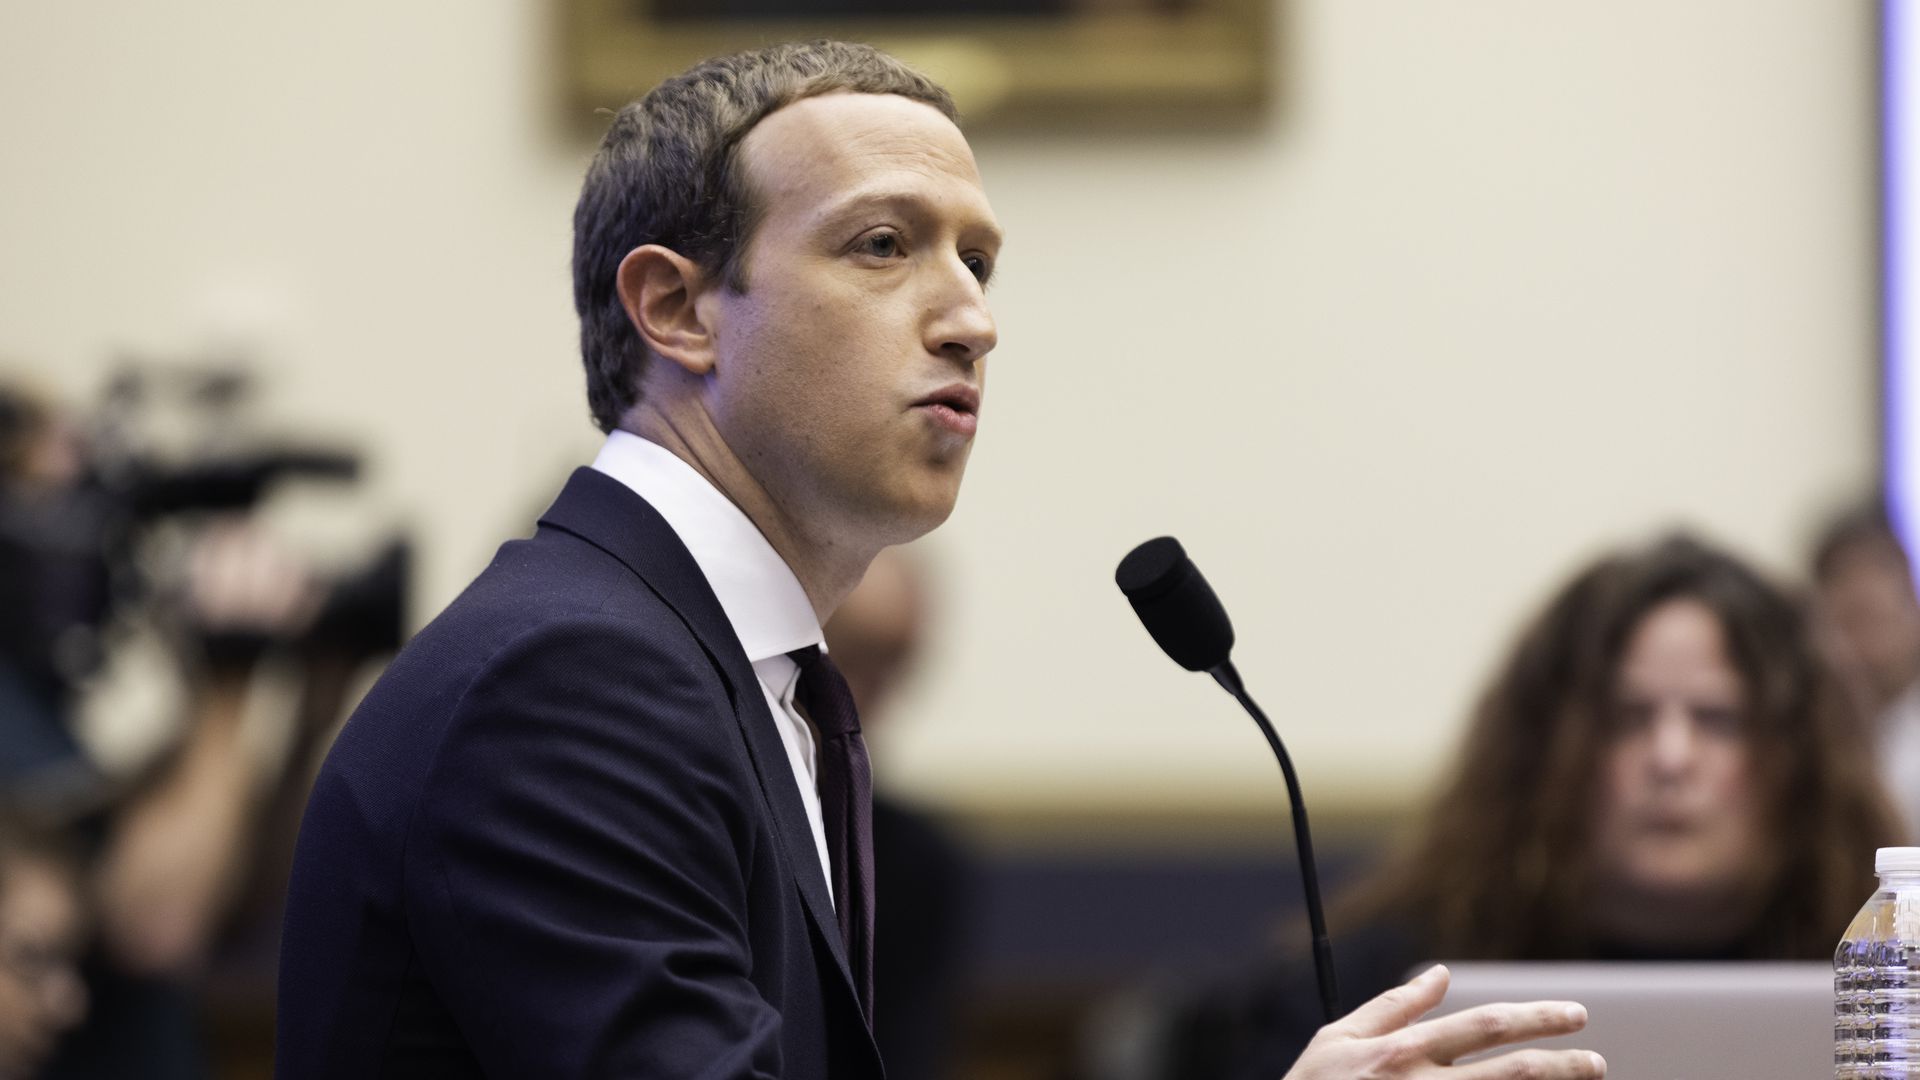 Facebook CEO Mark Zuckerberg testifying before the House Financial Services Committee on Wednesday October 23, 2019 in Washington, D.C. 